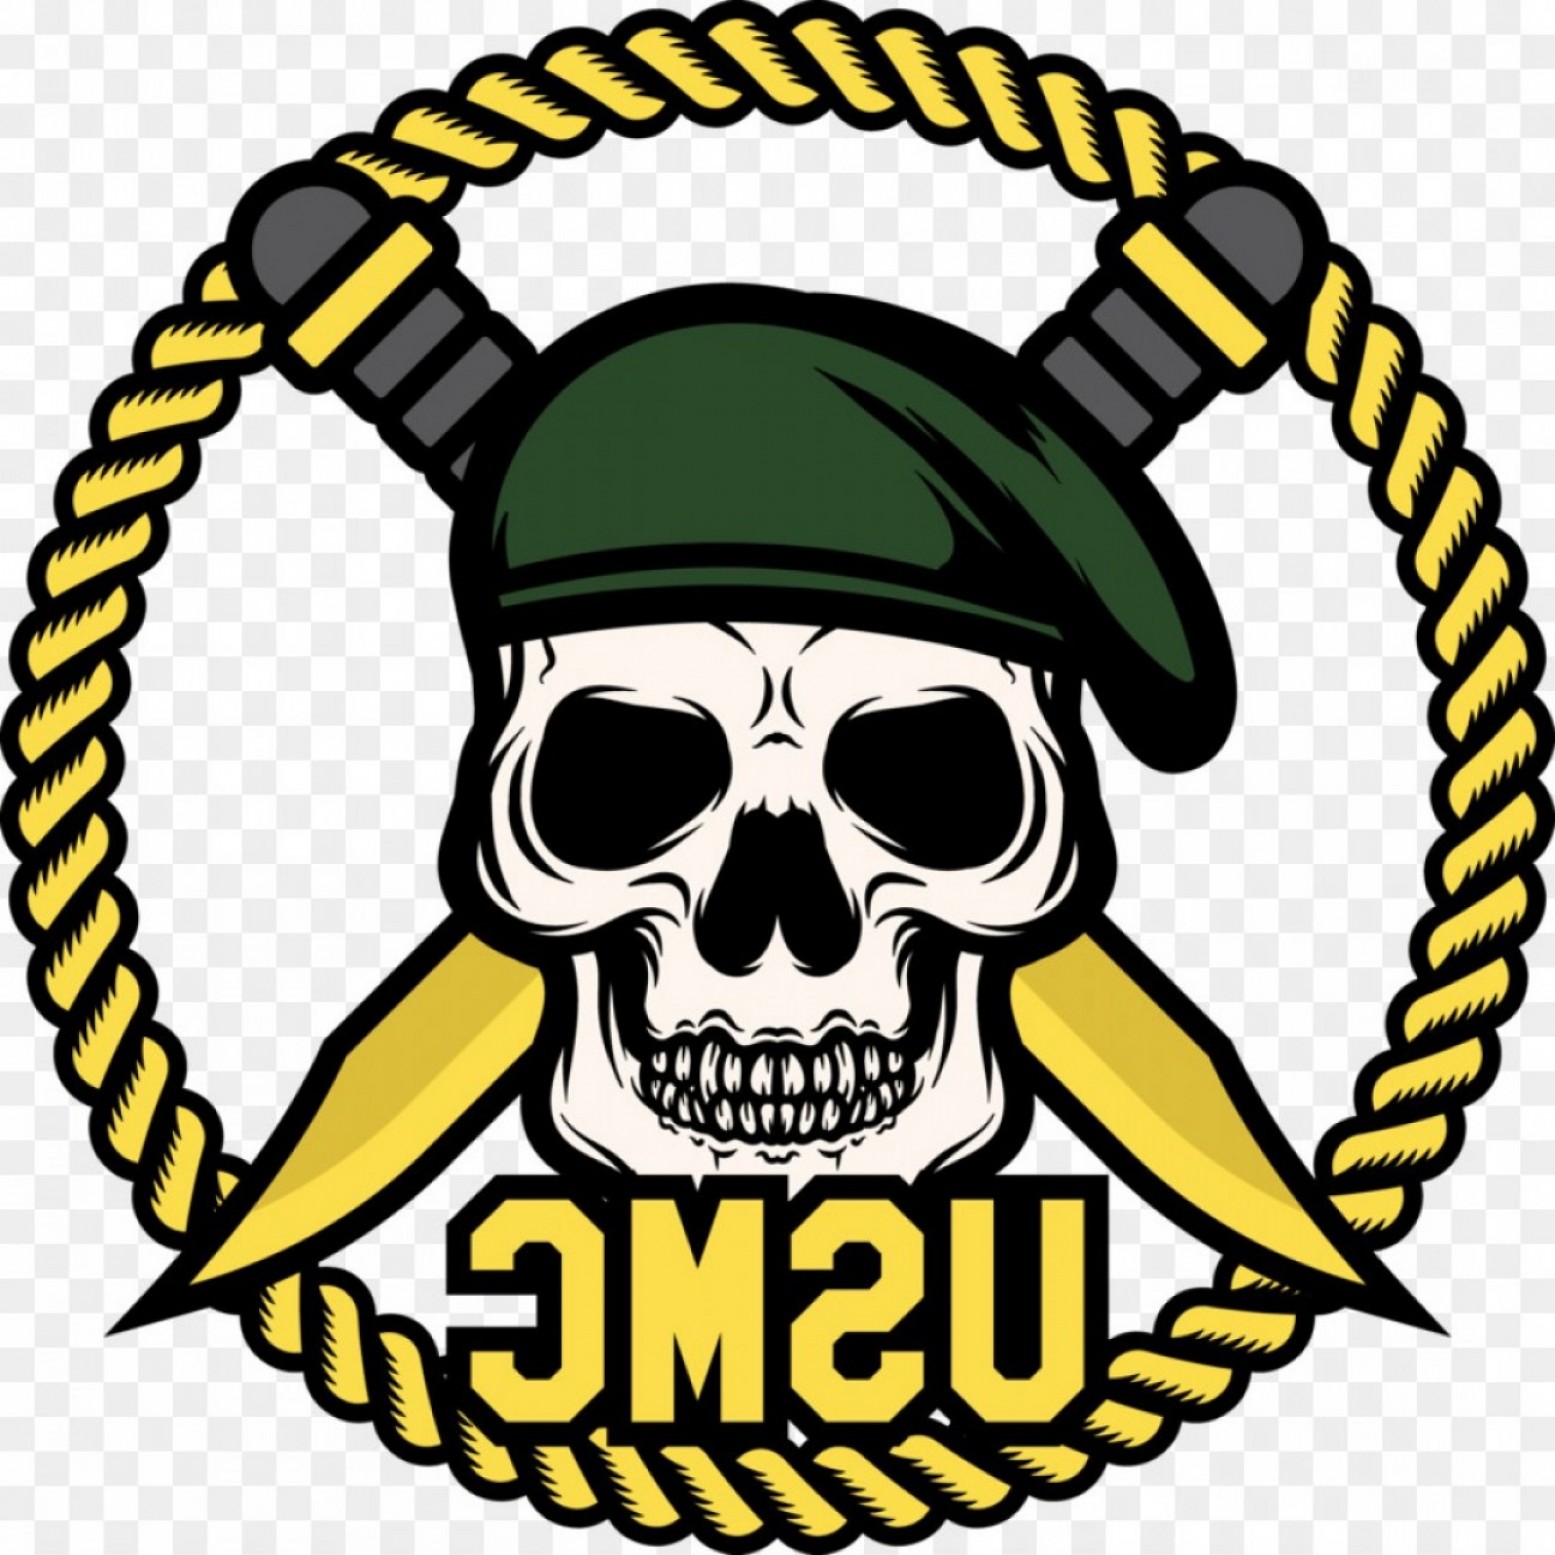 Download Marine Corps Emblem Vector at Vectorified.com | Collection ...